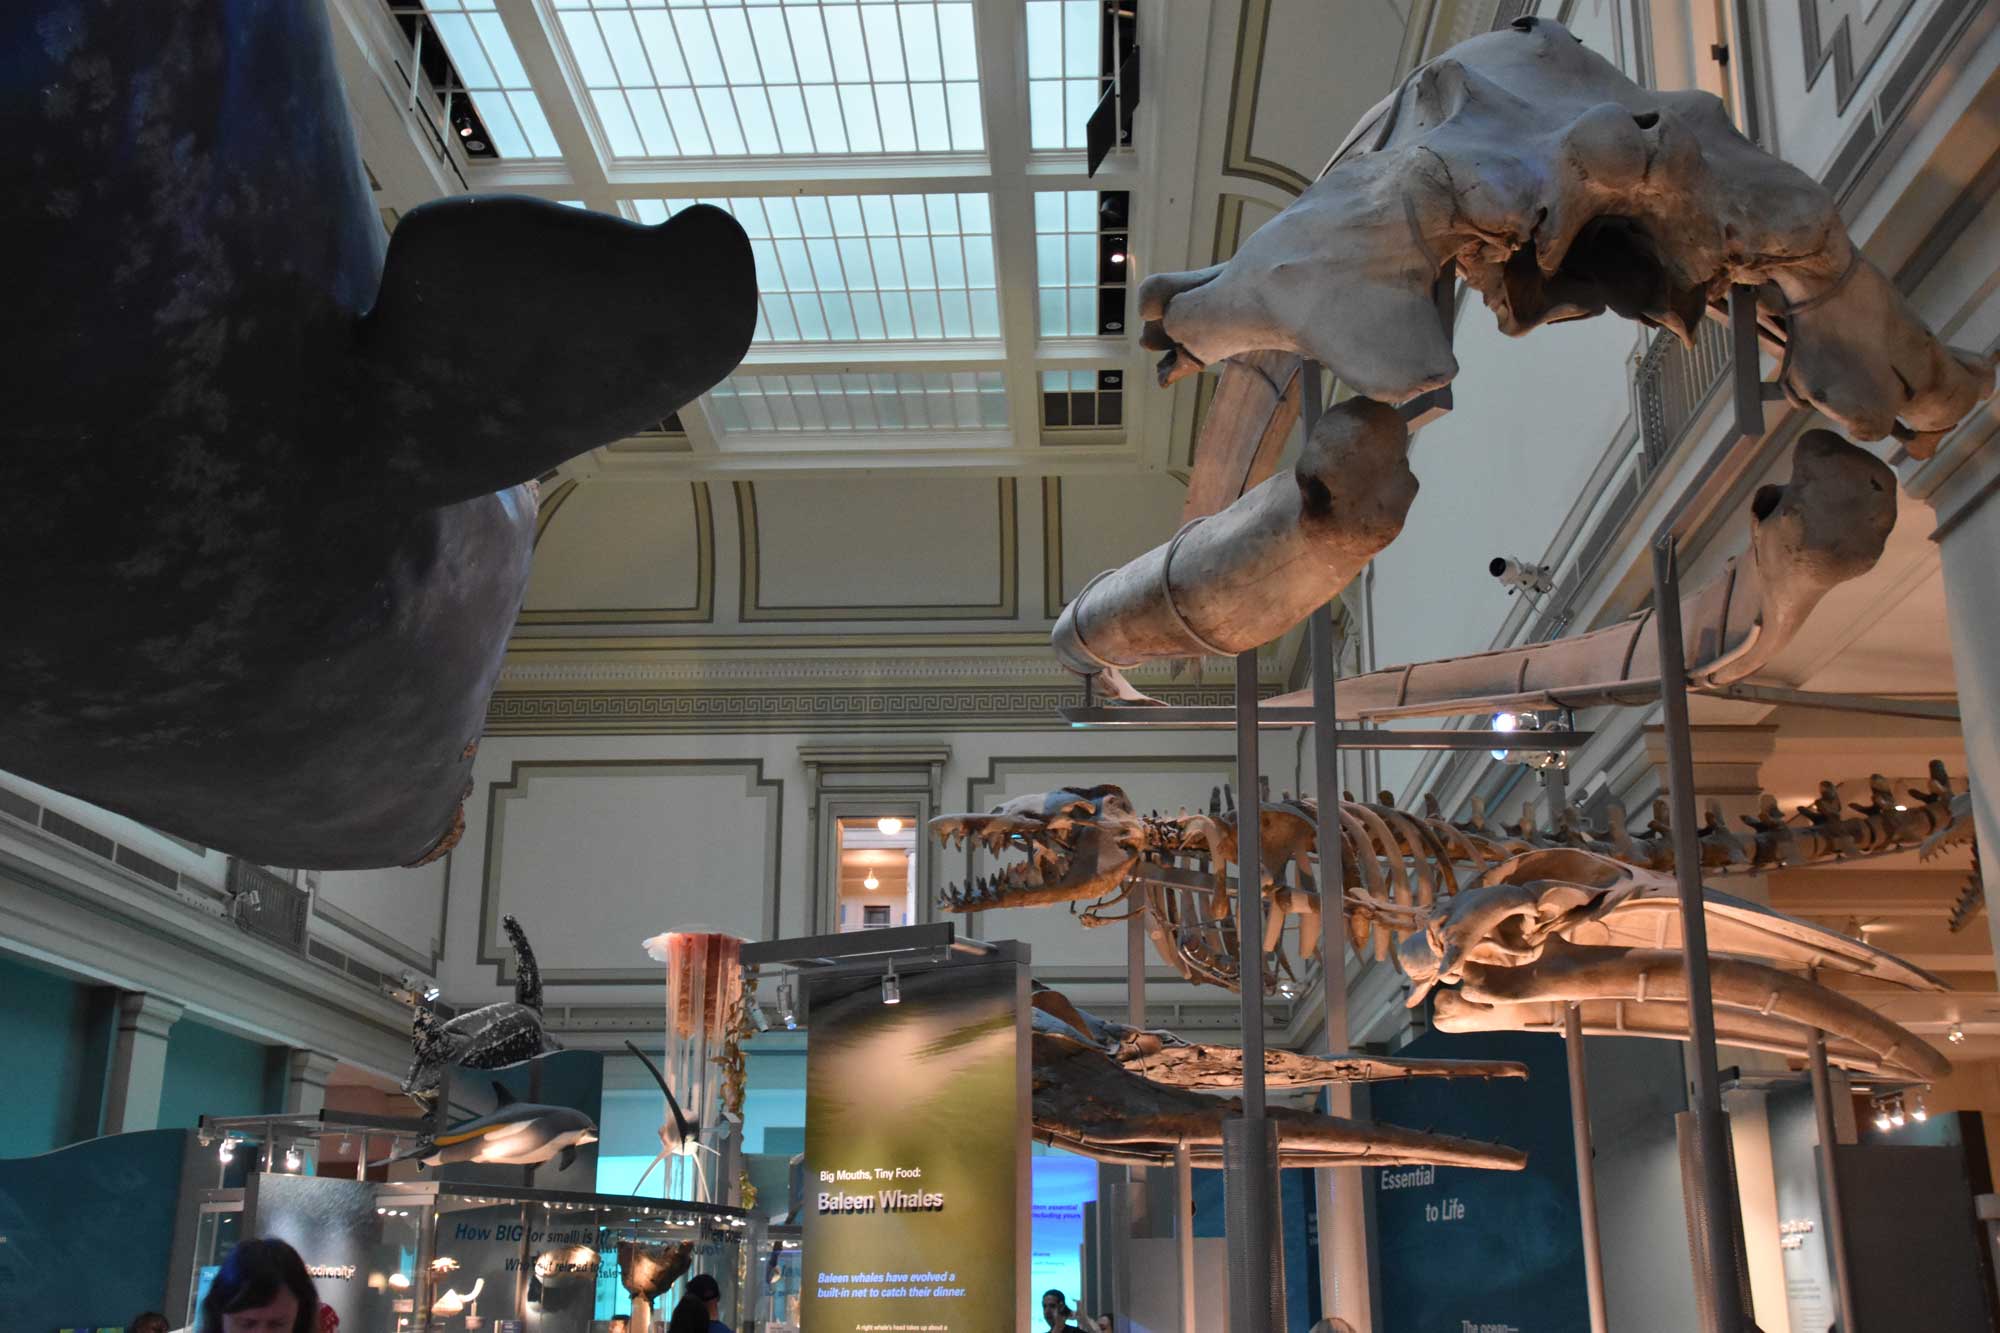 a museum exhibition with animal skeletons hanging from the ceiling